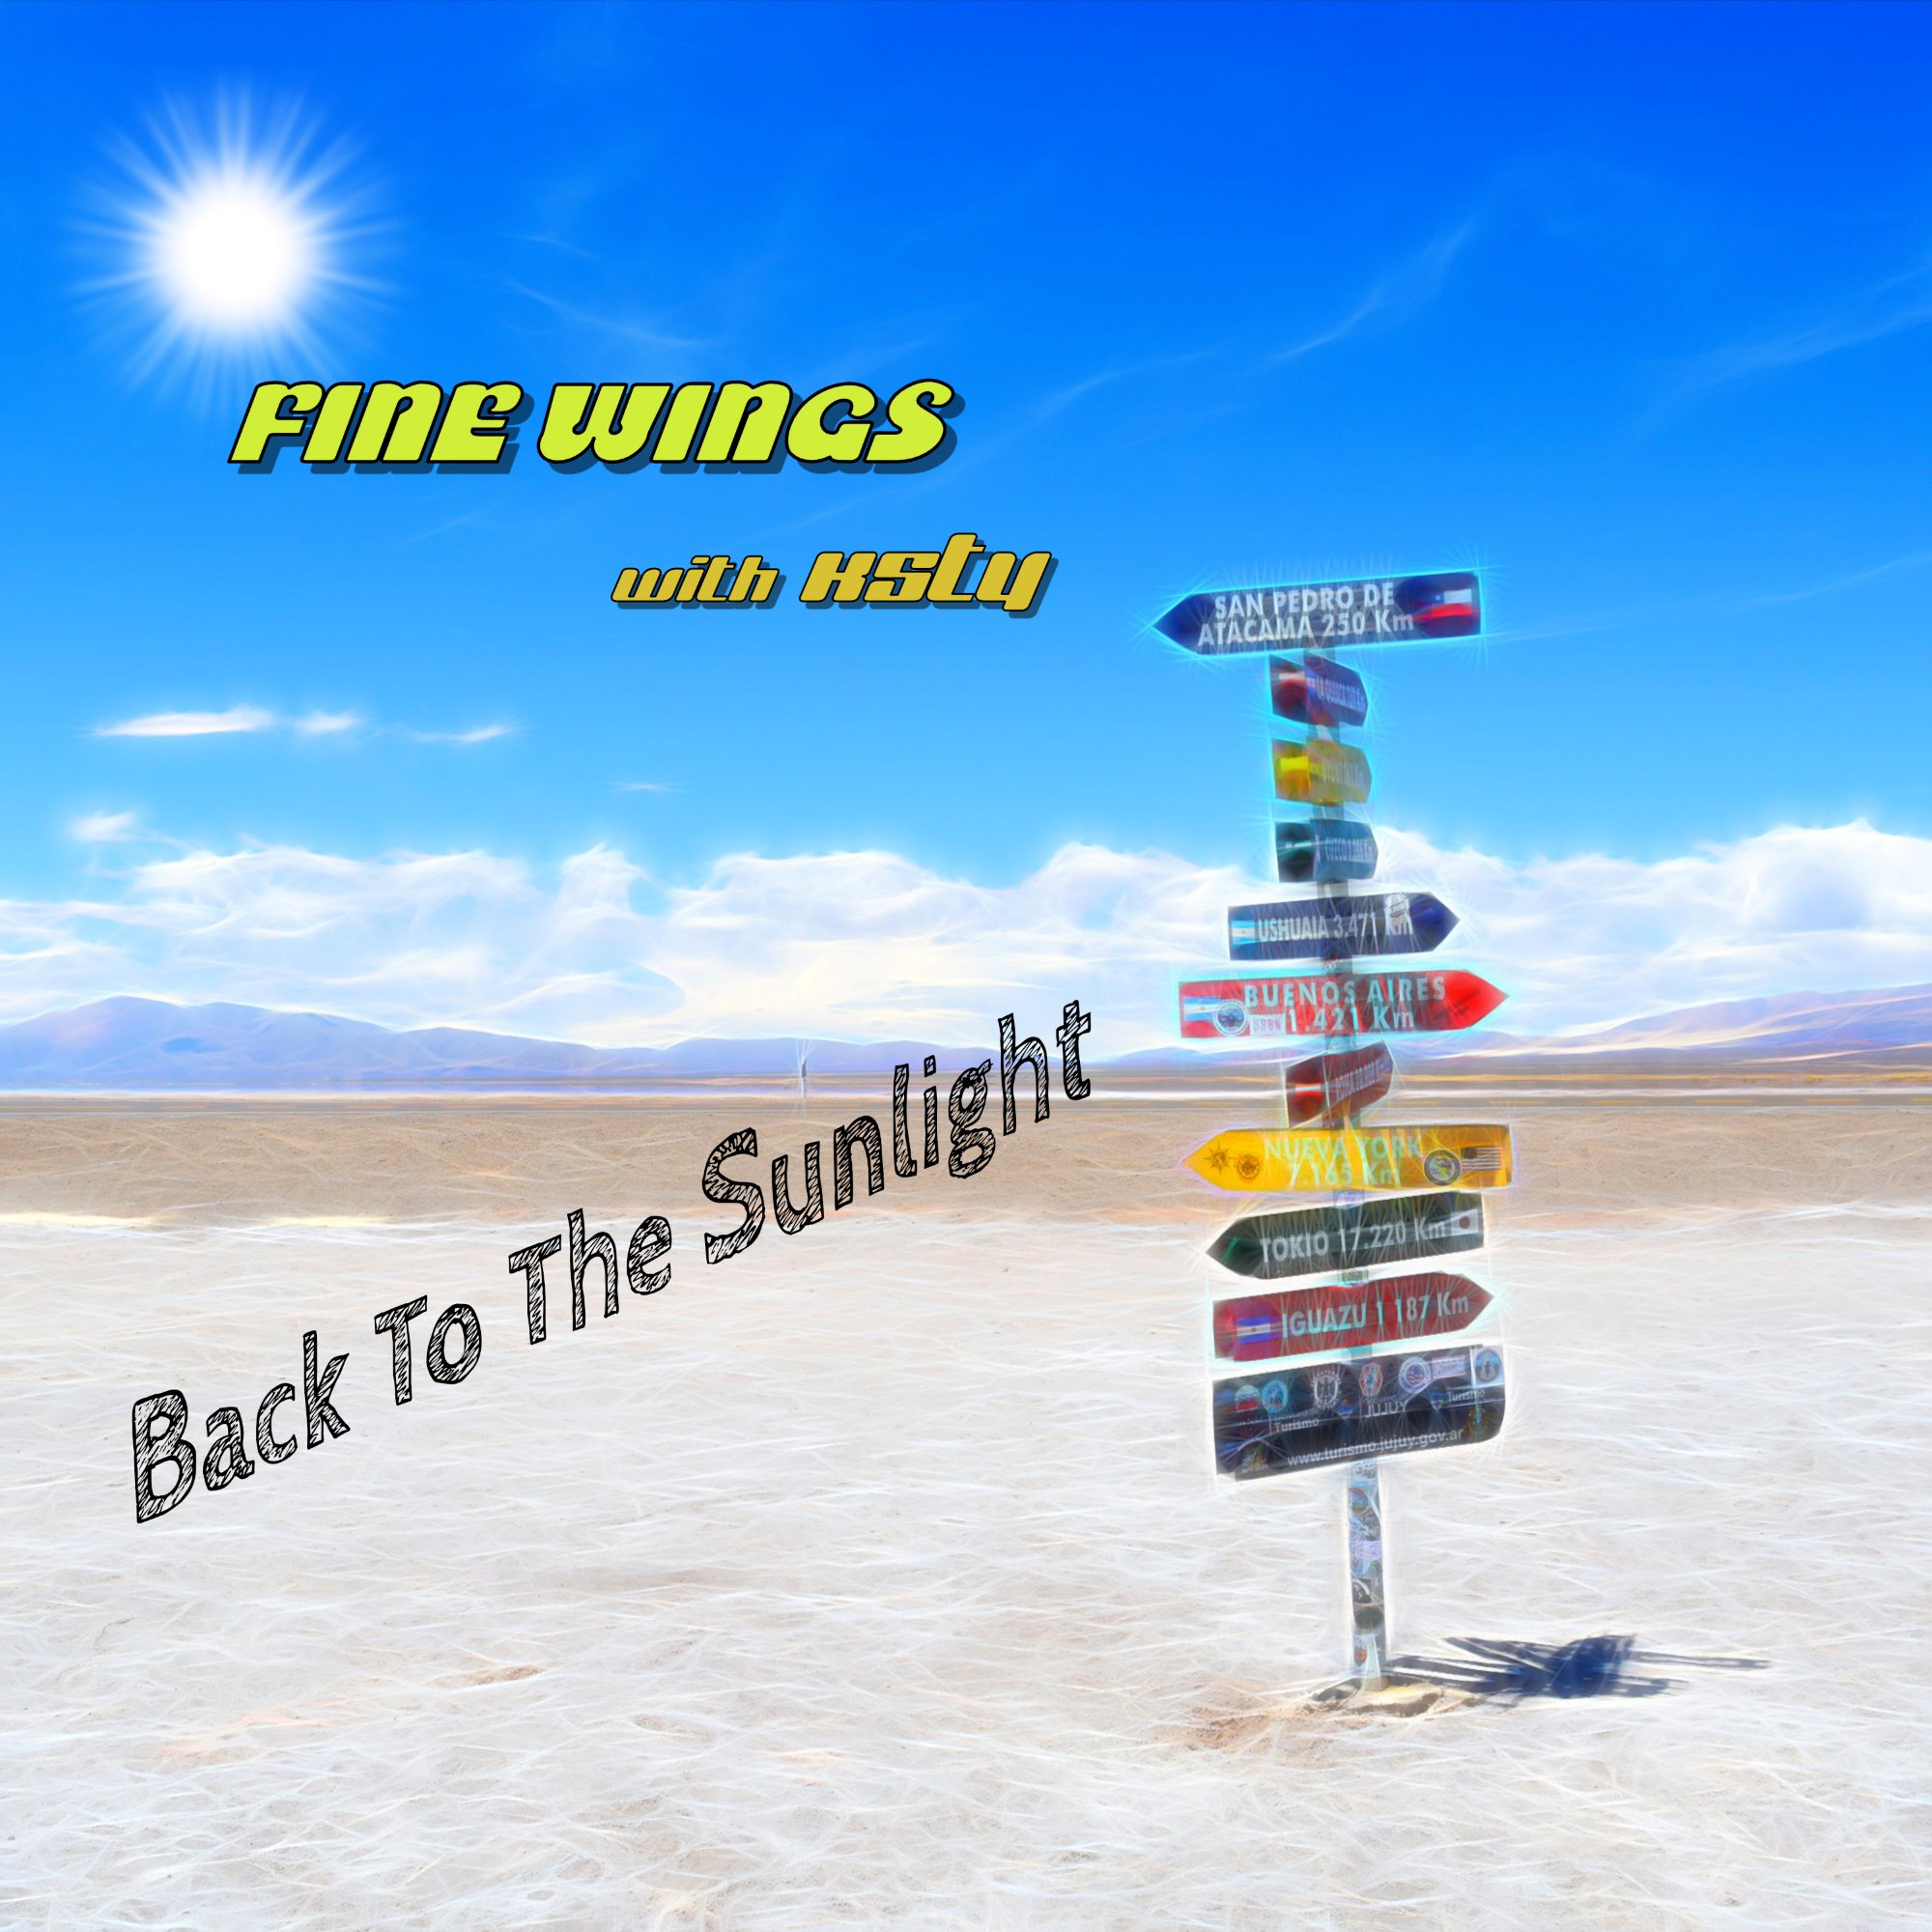 Back To The Sunlight アートワーク2